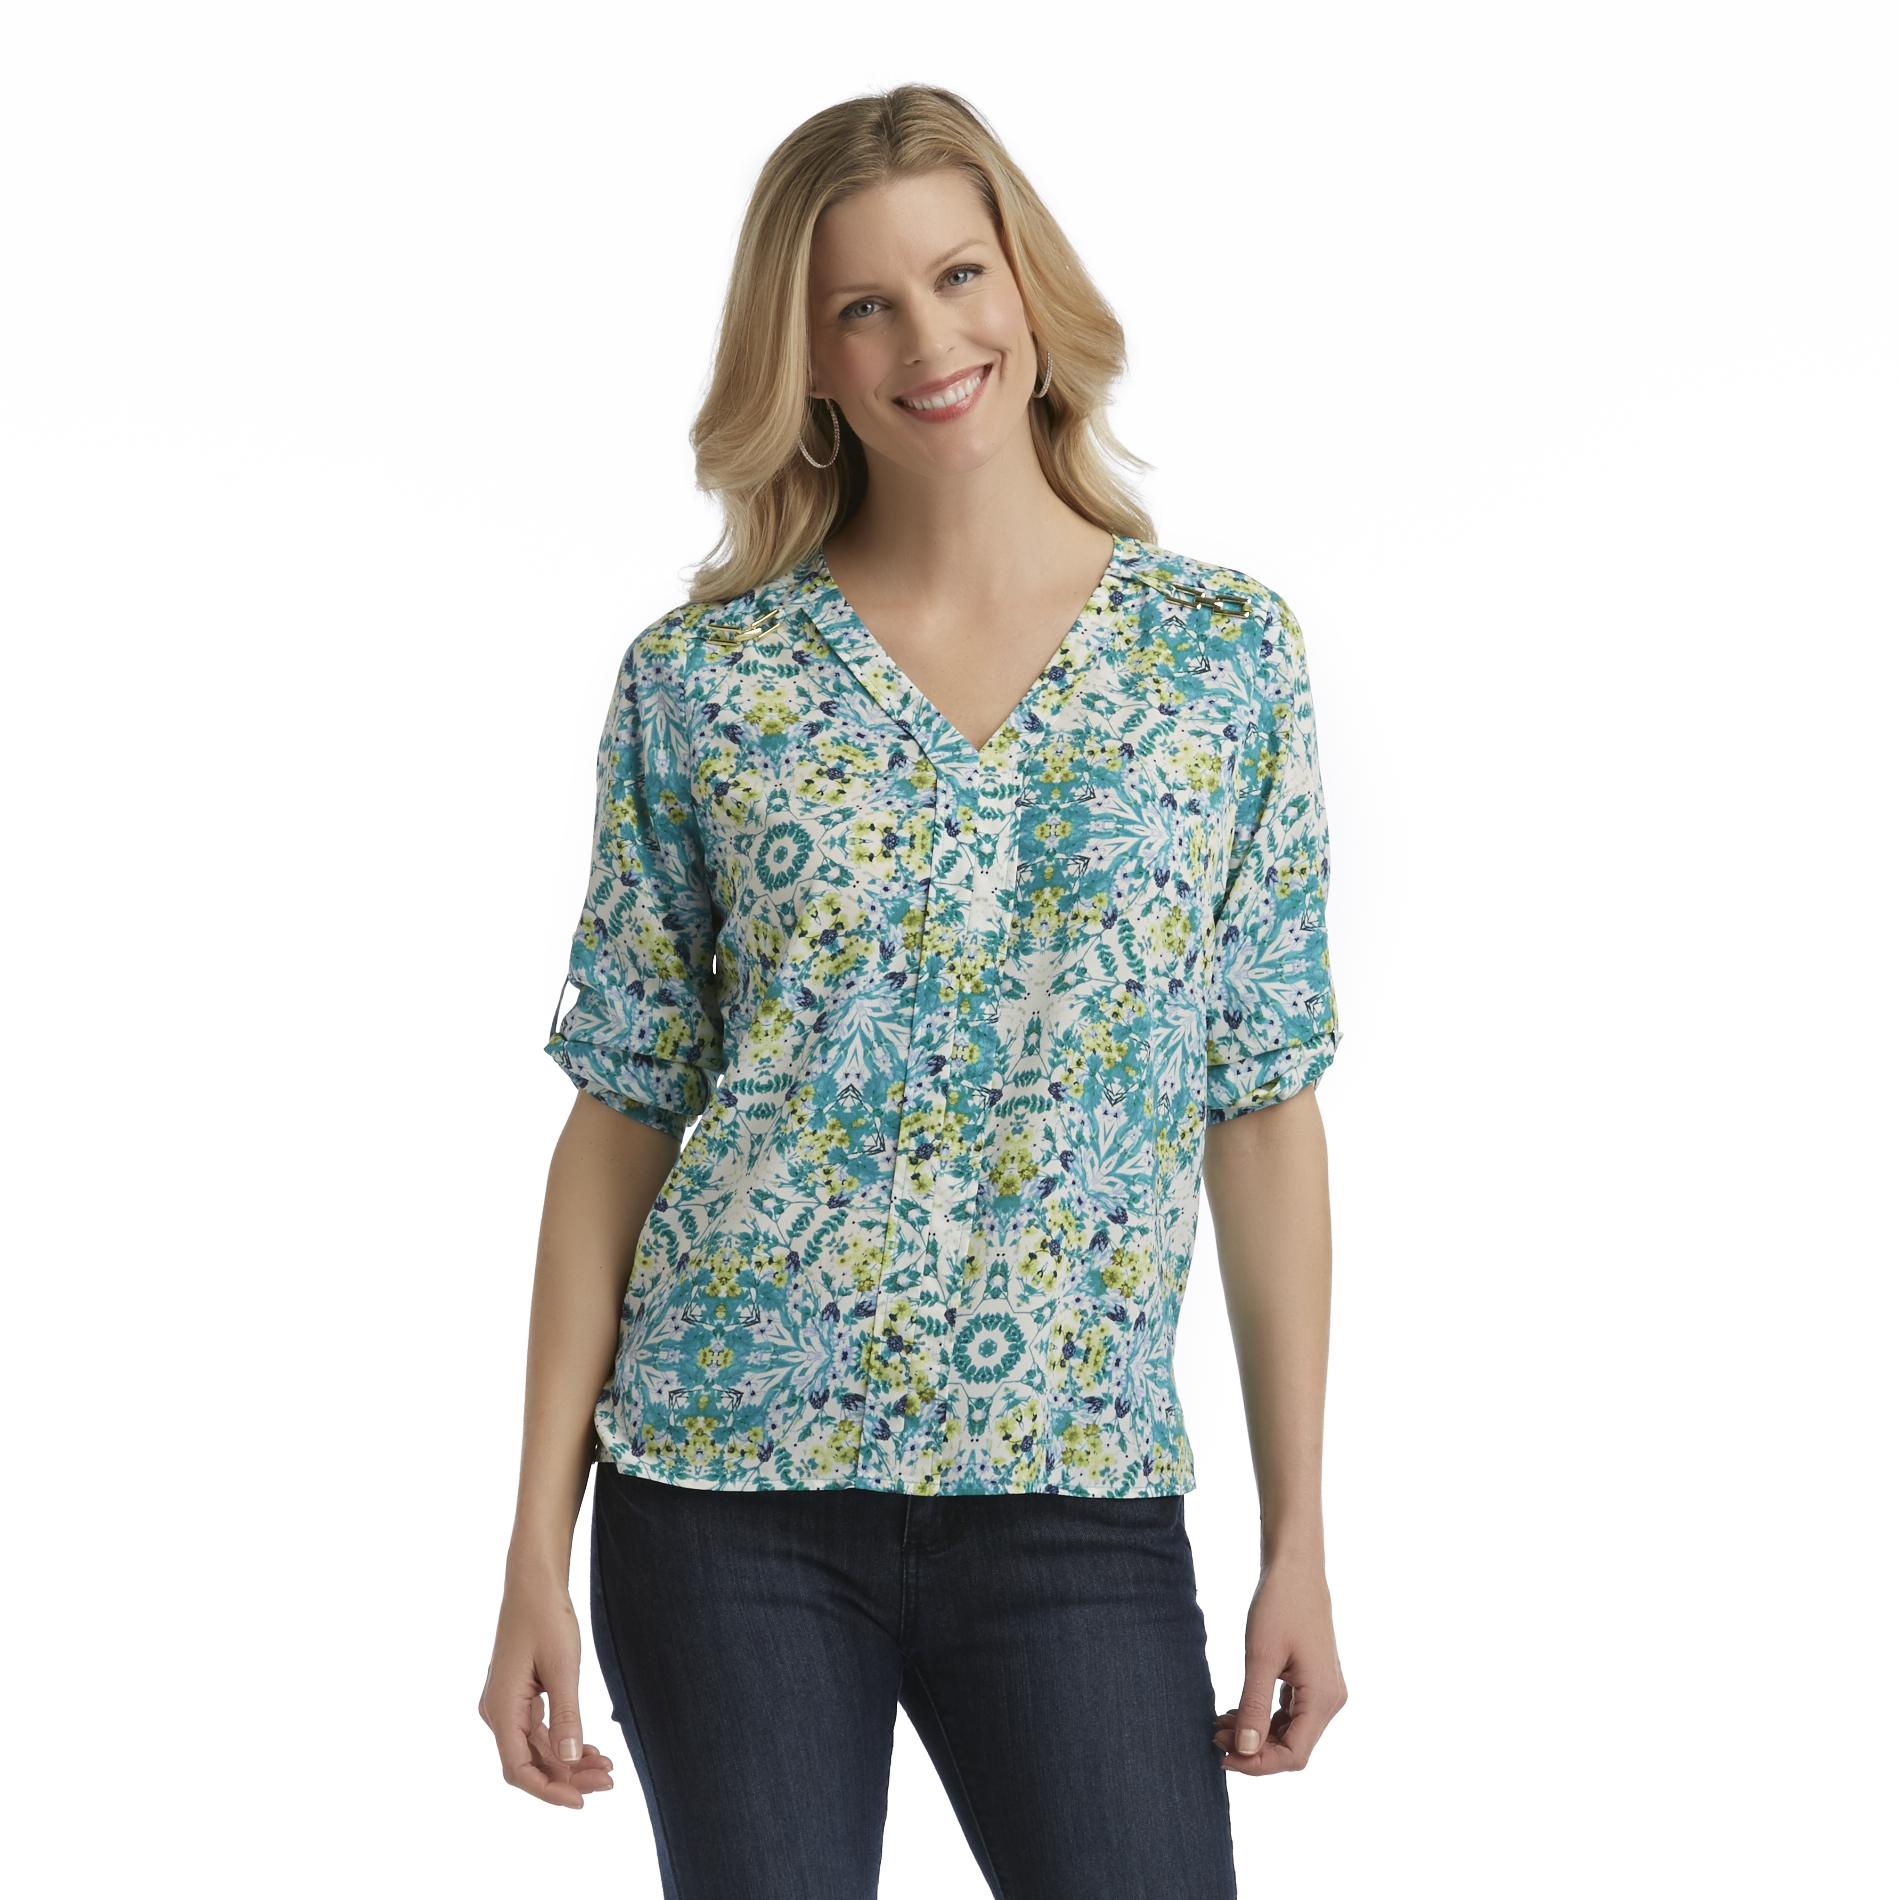 Jaclyn Smith Women's Embellished Blouse - Floral